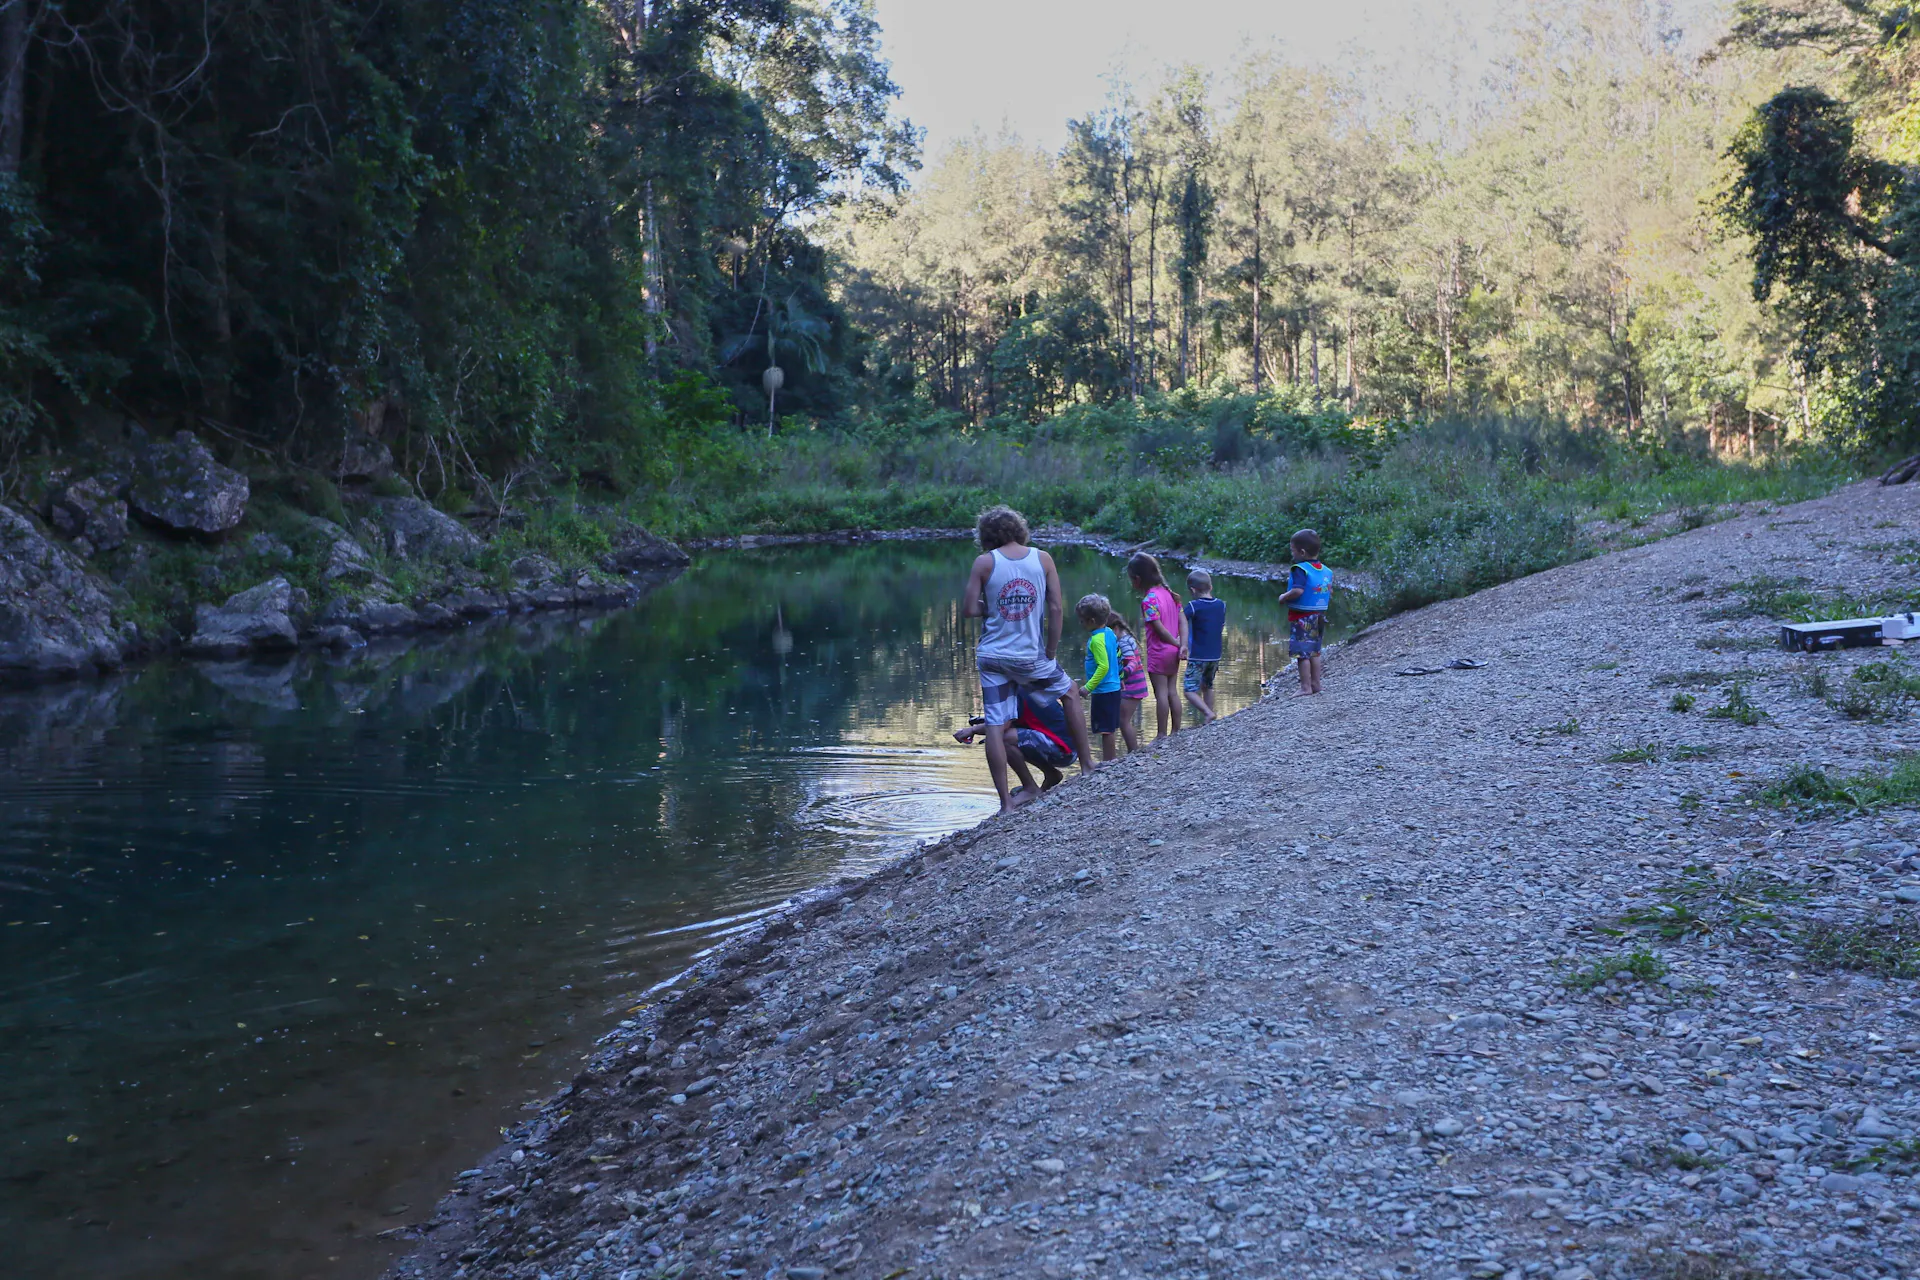 A family splays near the creek edge surrounded by forest.